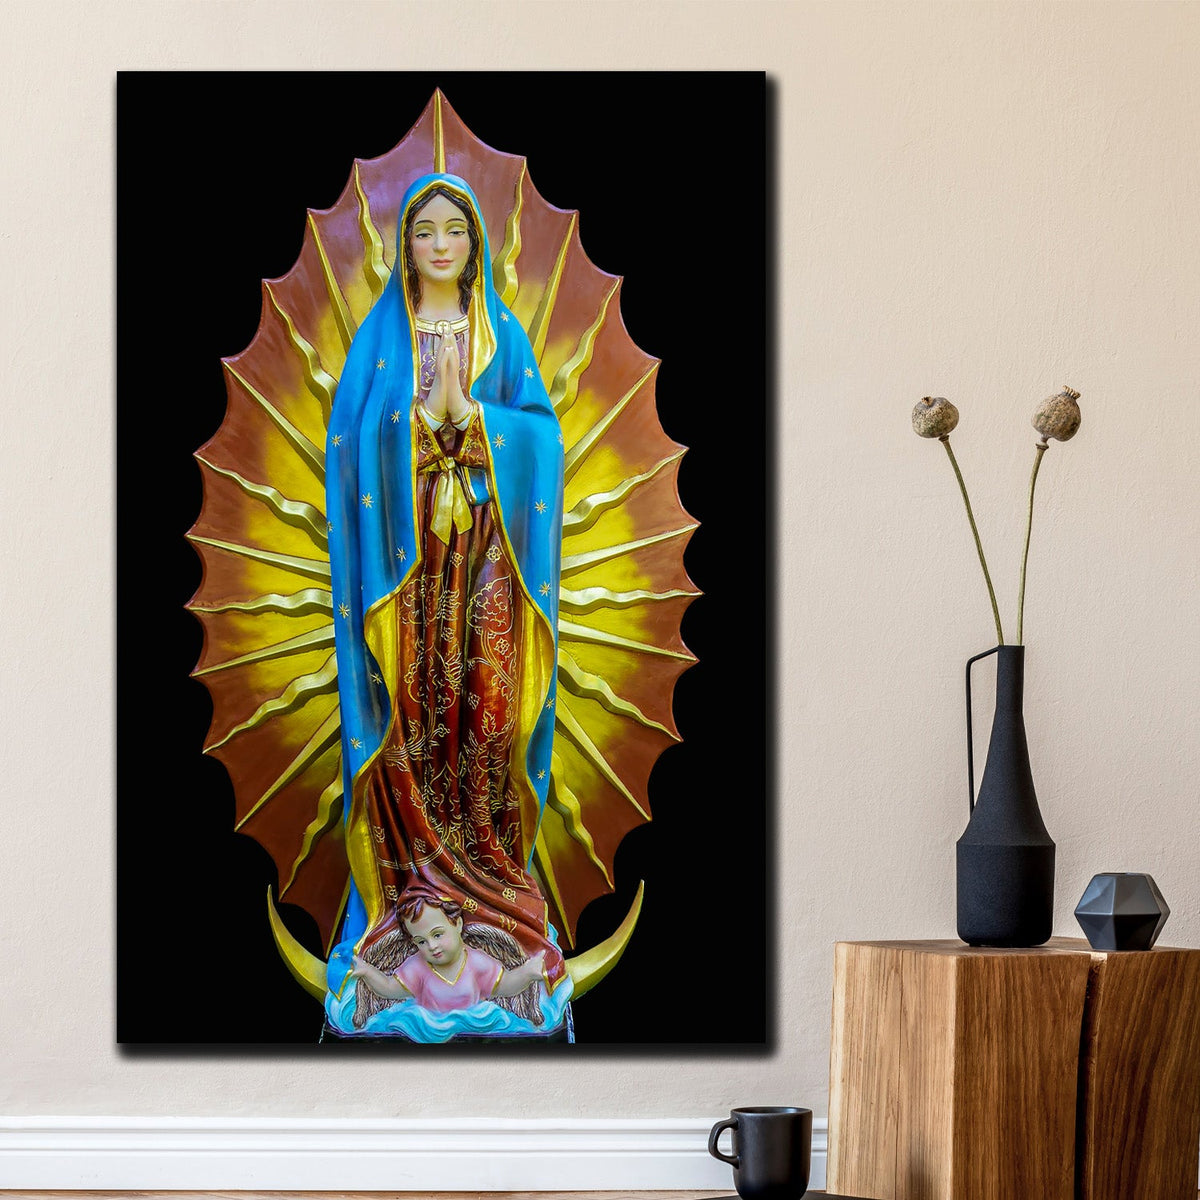 https://cdn.shopify.com/s/files/1/0387/9986/8044/products/MaryOurLadyOfGuadalupeCanvasArtprintStretched-3.jpg